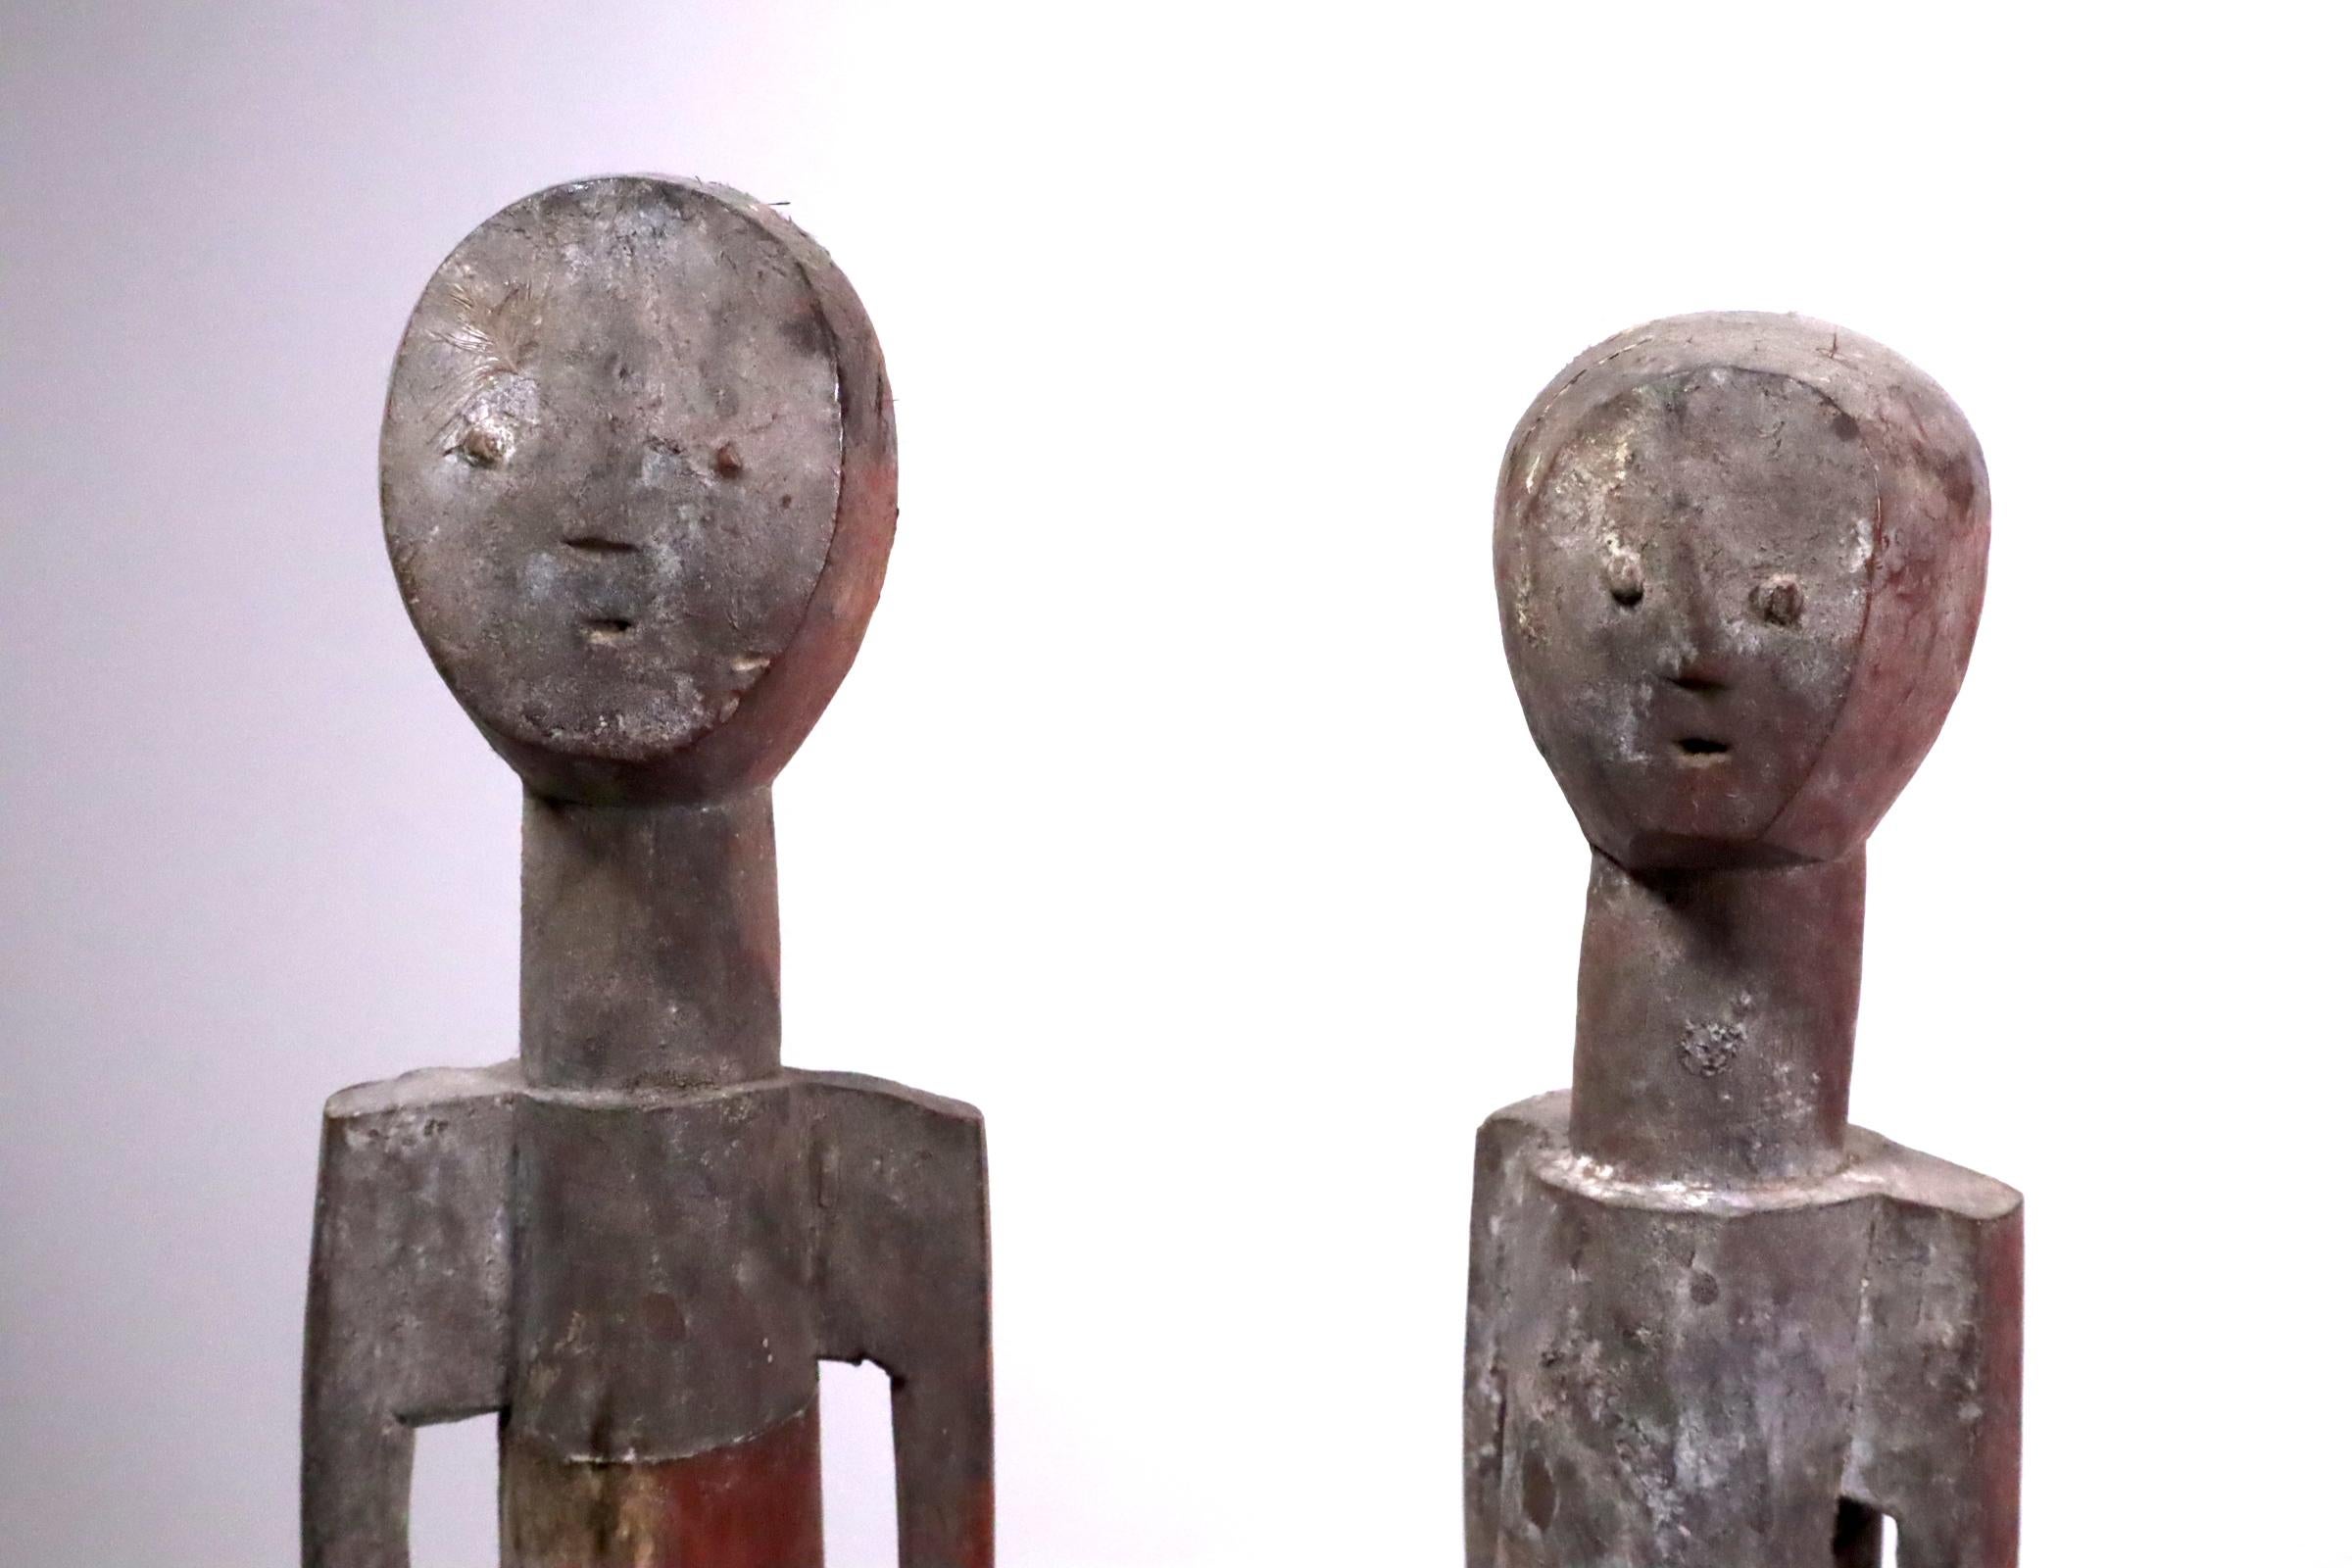 An unusually large pair with expressive faces. As a couple they interact with each other as though in a narrative or dialogue. A perfect example of how African artists are capable of capturing emotions with minimal means. The type of art that